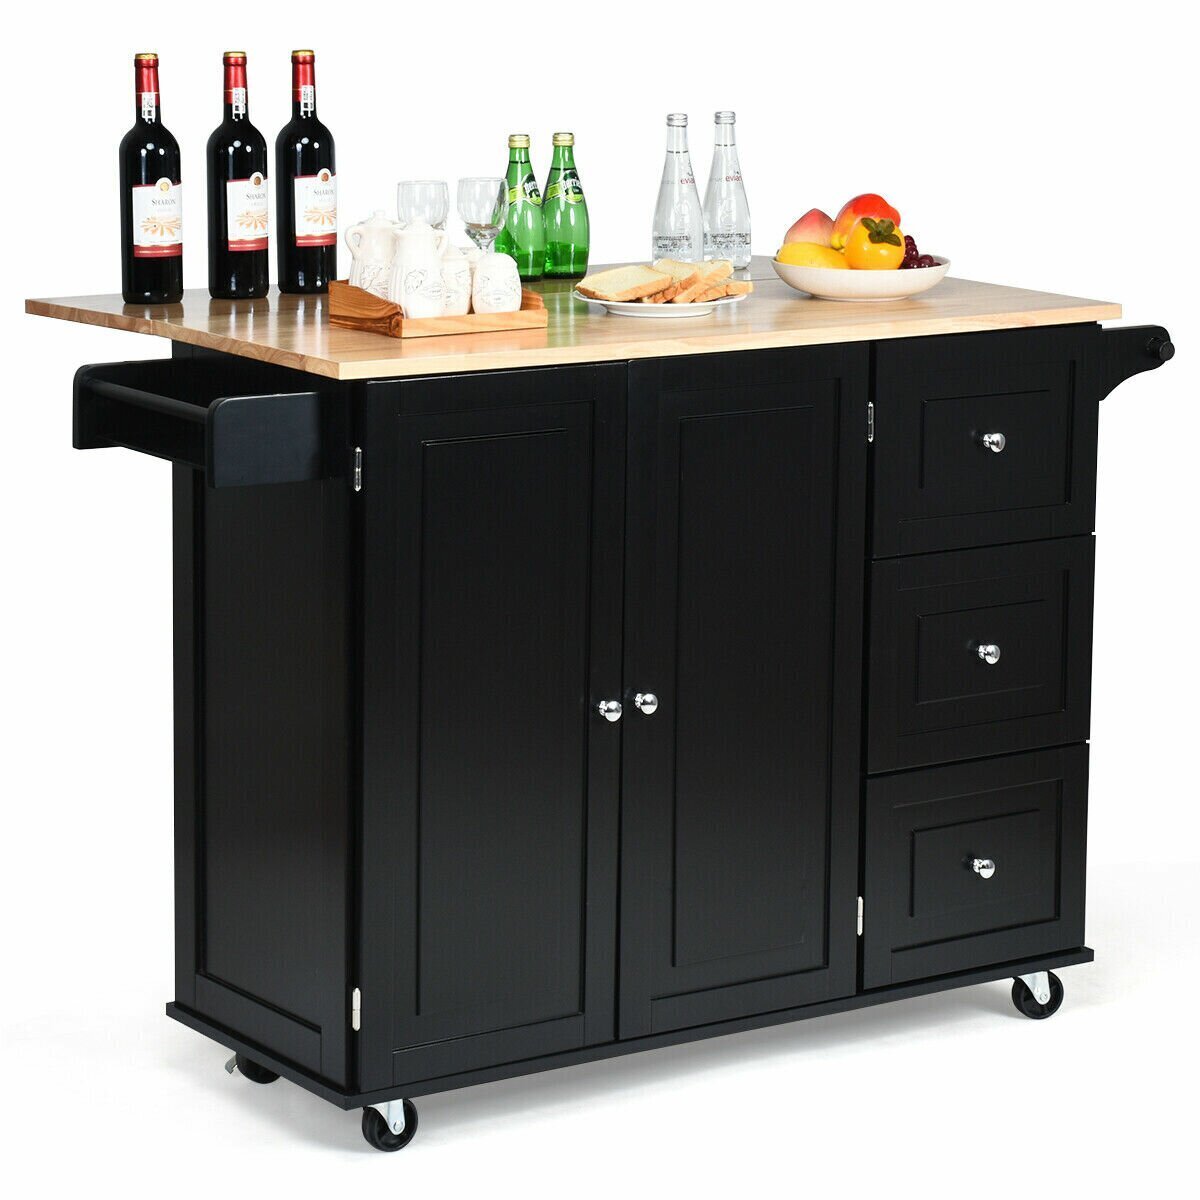 Sleek Commercial Kitchen Island for Wineries